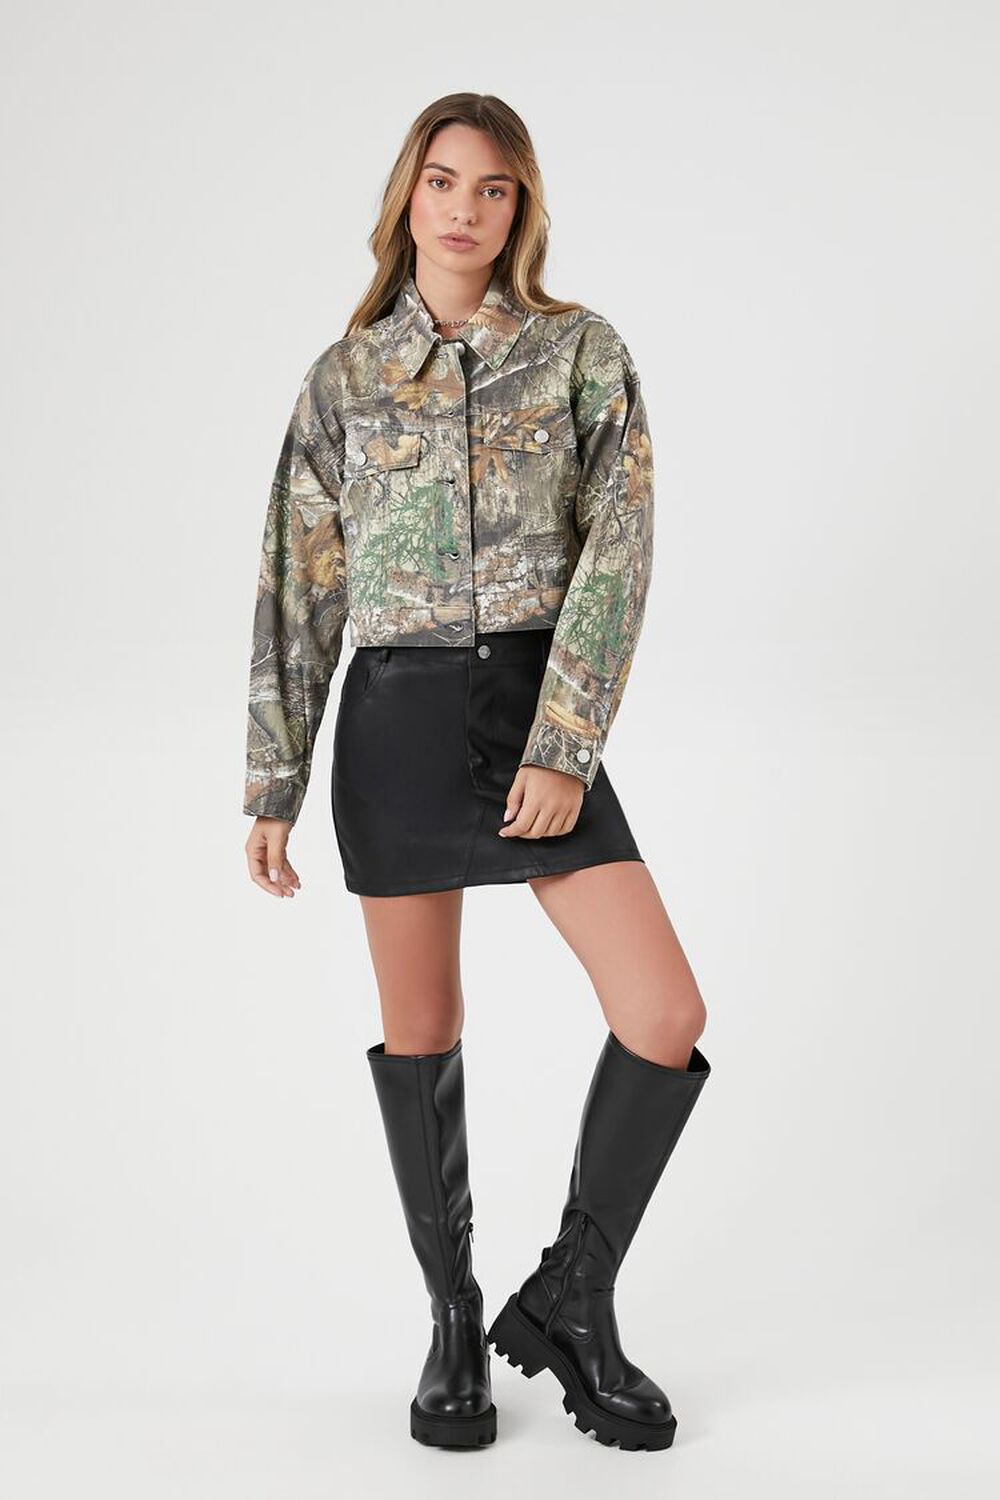 Fashion-forward Camo Print Jacket by Forever 21